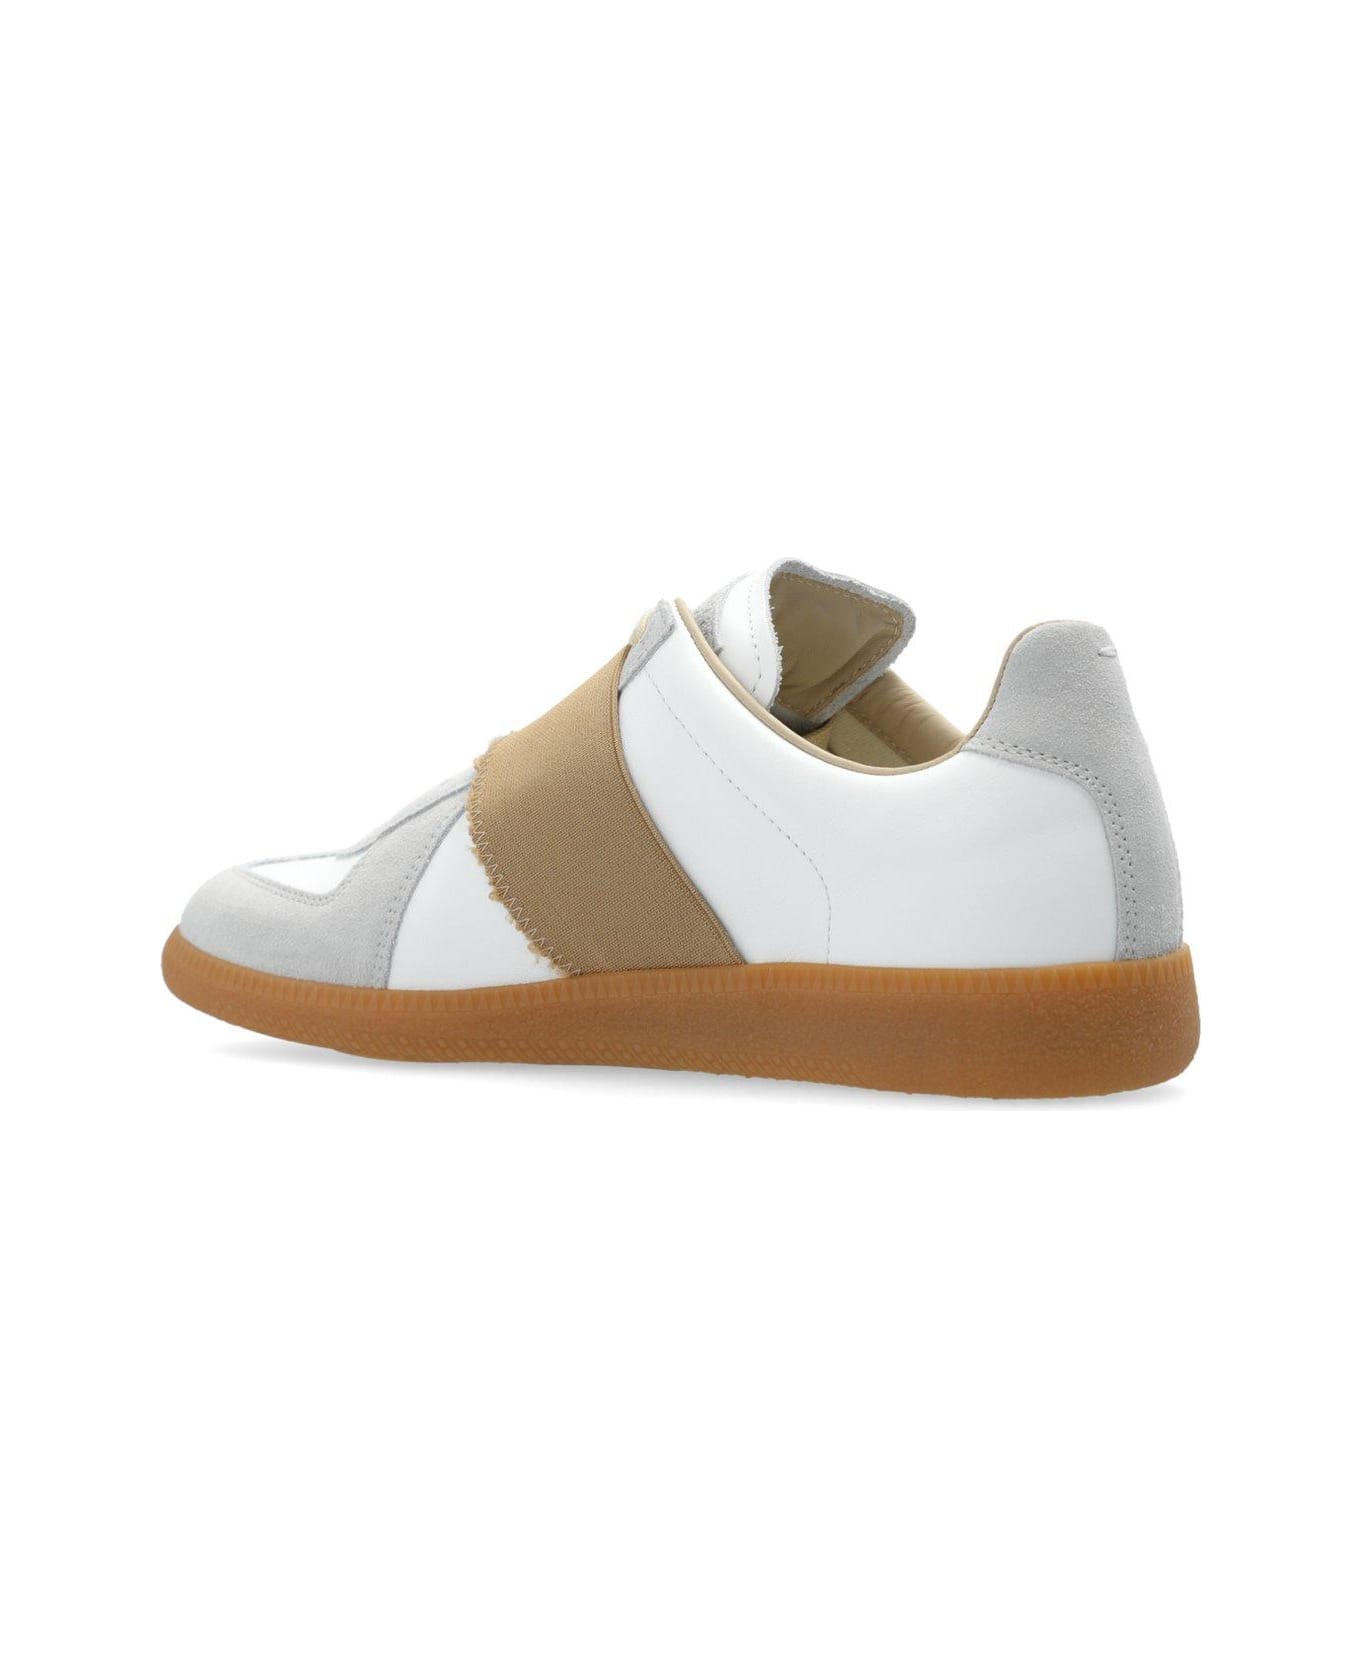 Maison Margiela Low-top Sneakers - White スニーカー